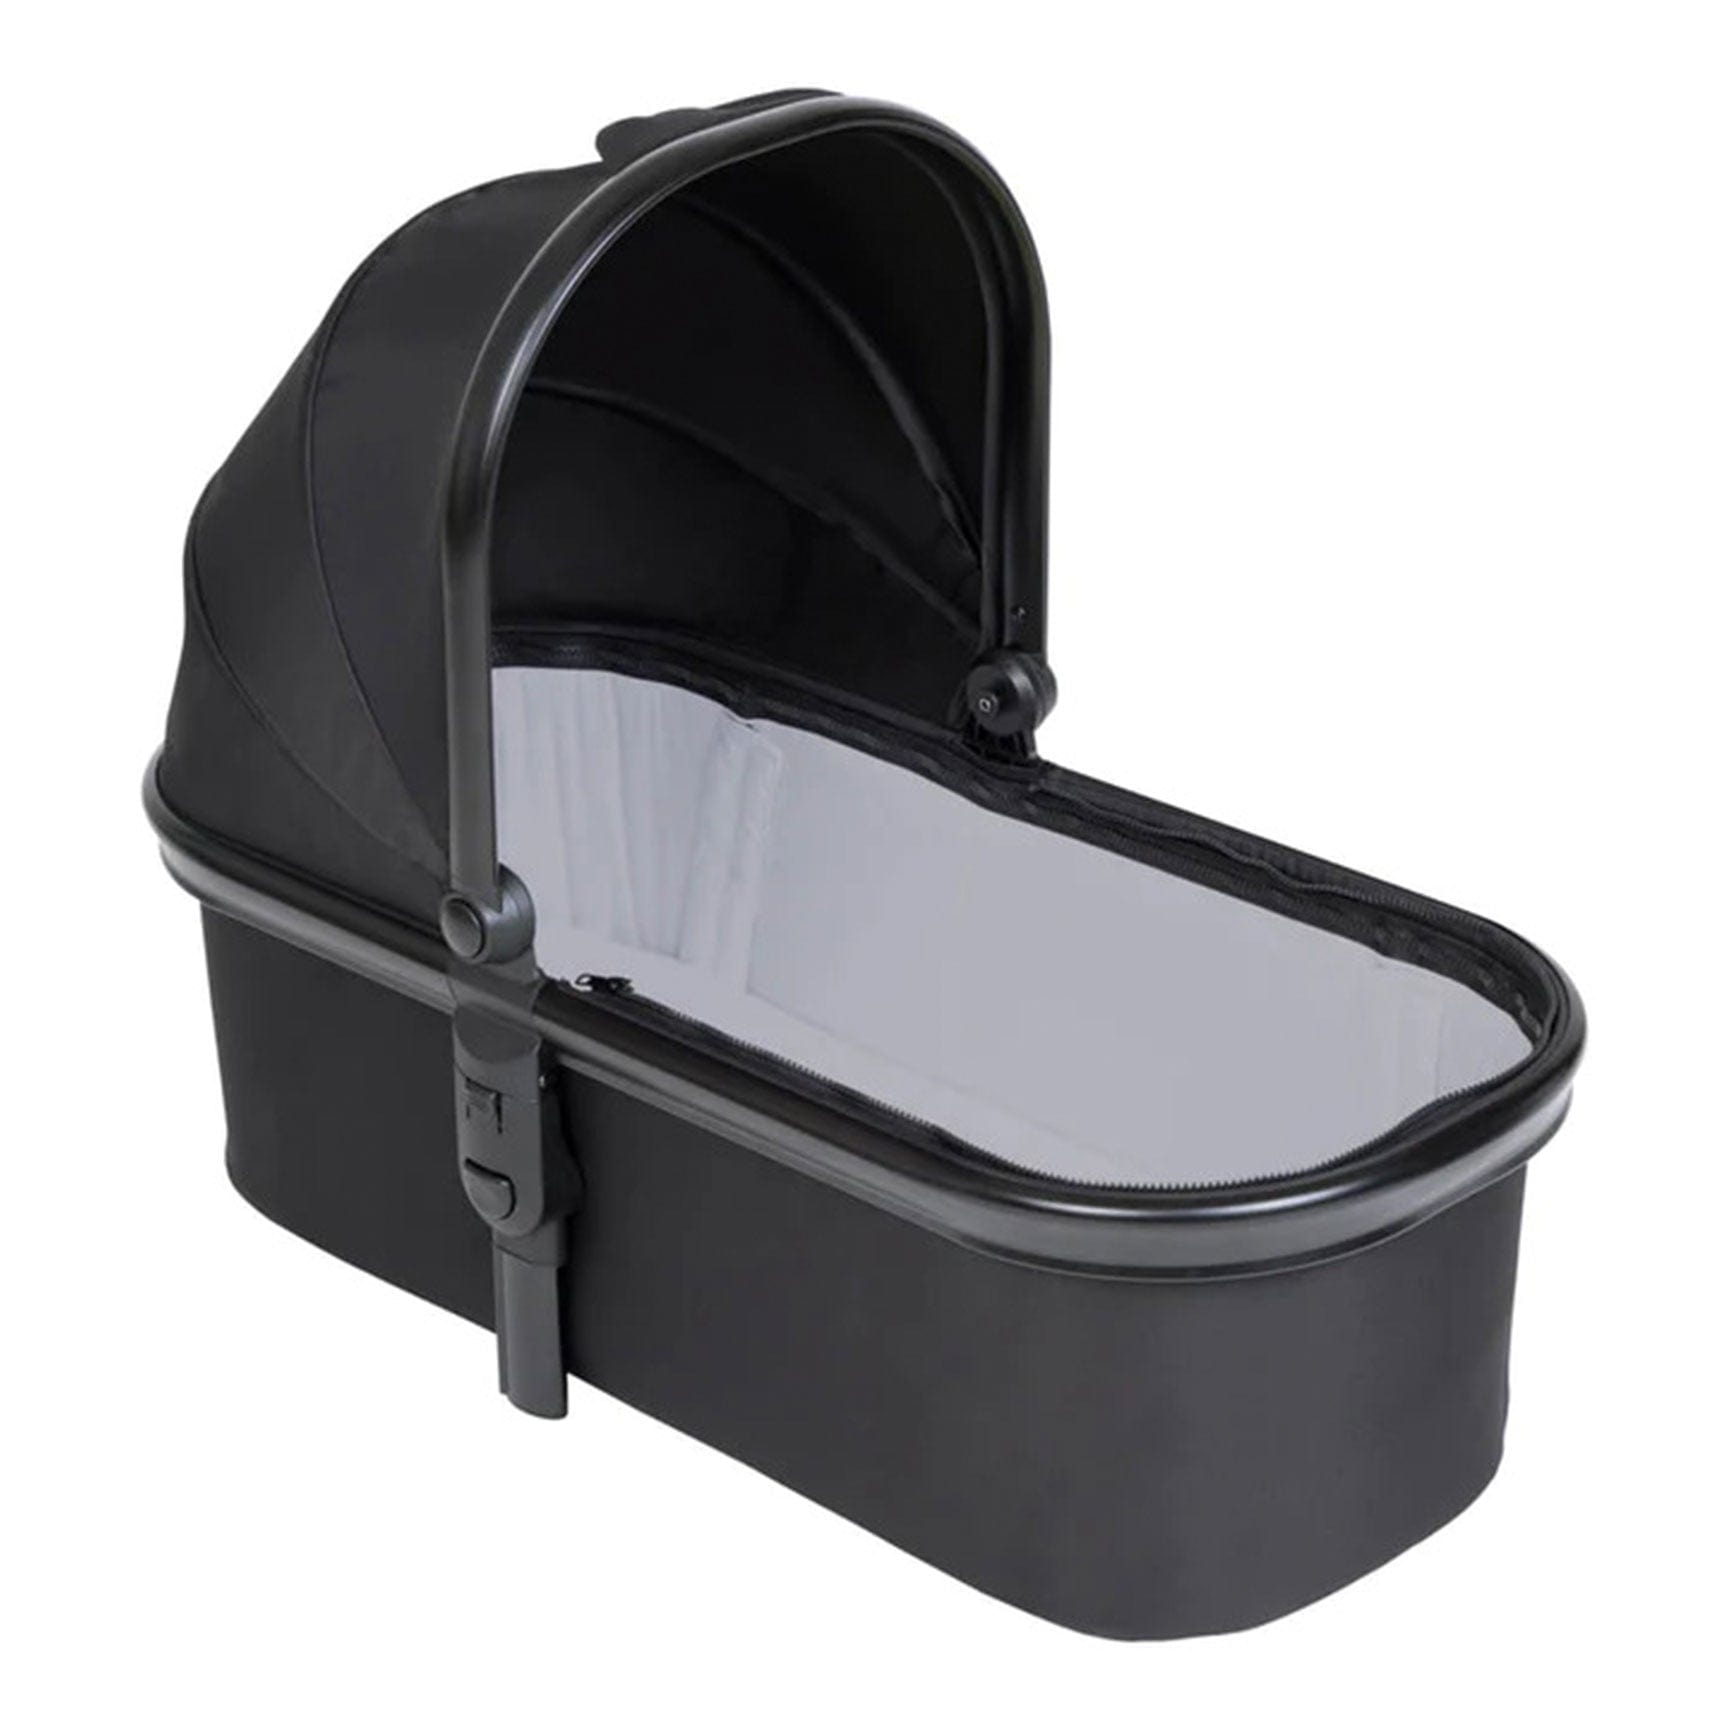 Phil & Teds Chassis & Carrycots Phil & Teds Snug Carrycot With Lid - Chilli 12354-CHI